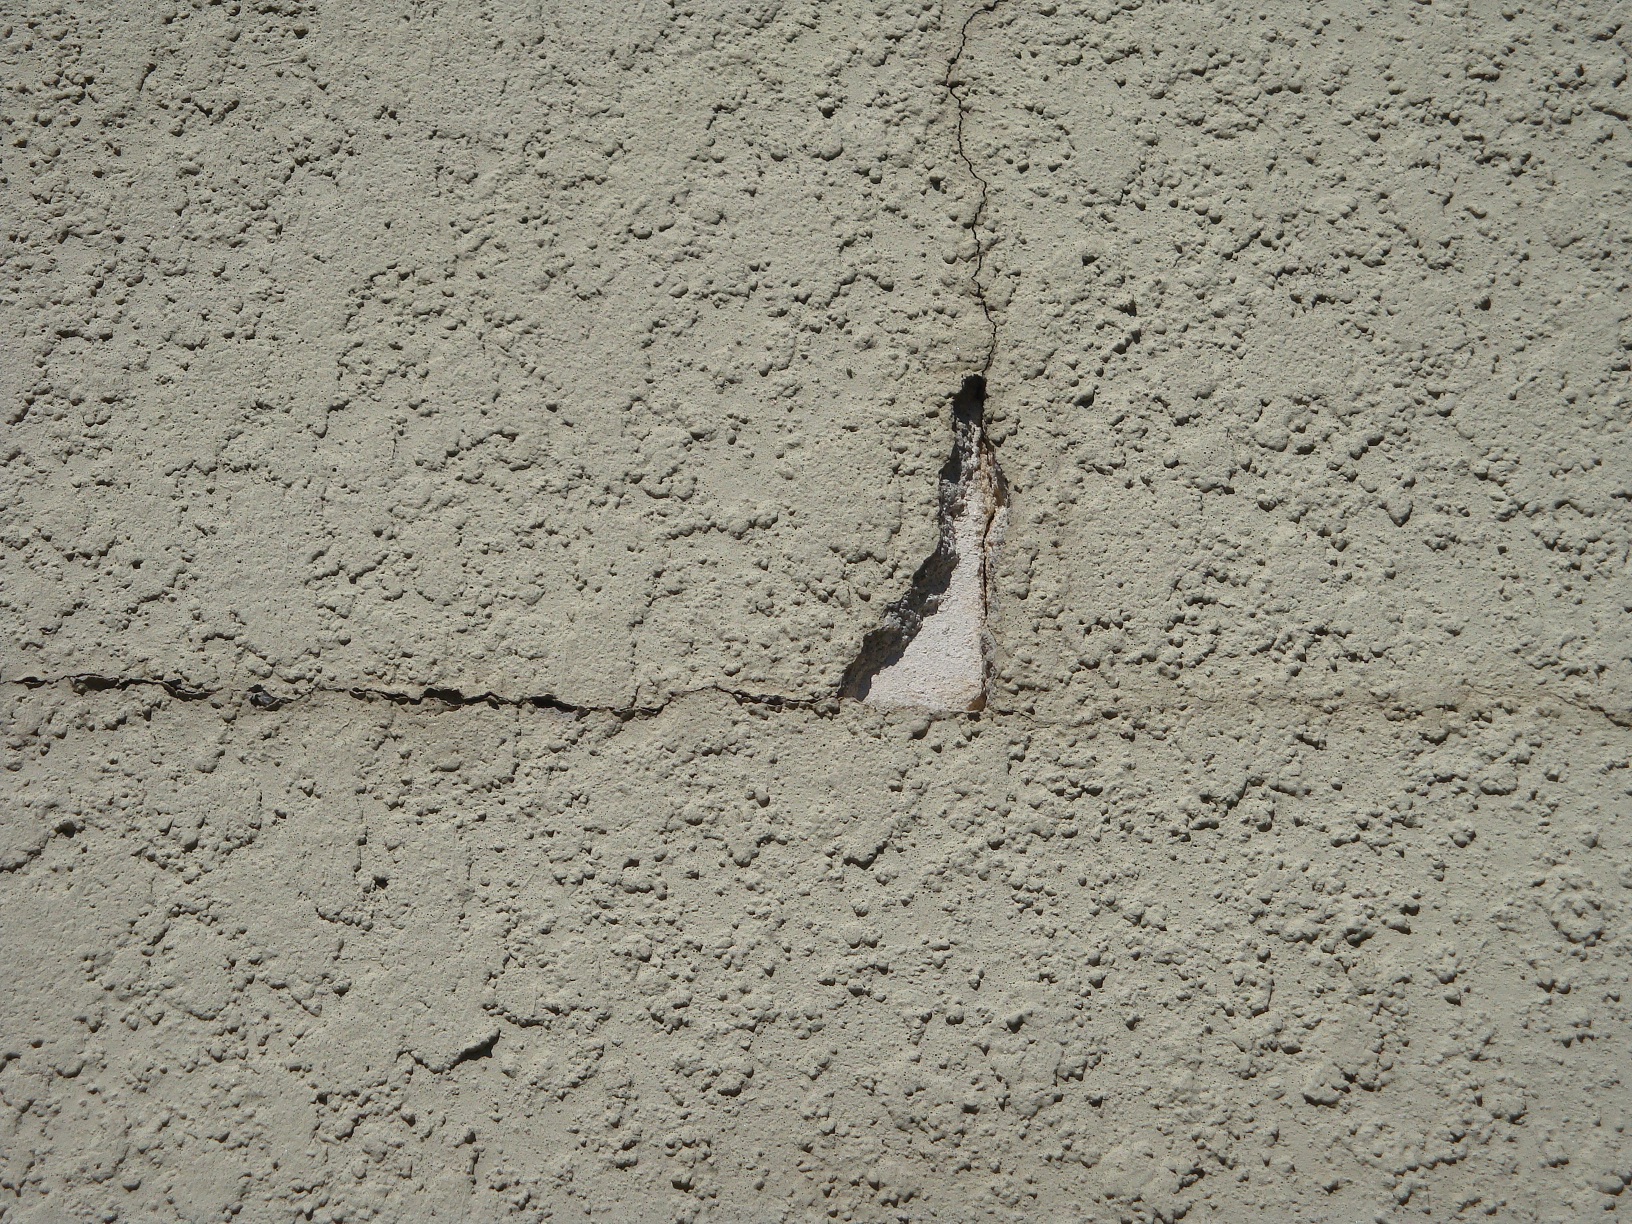 patching stucco